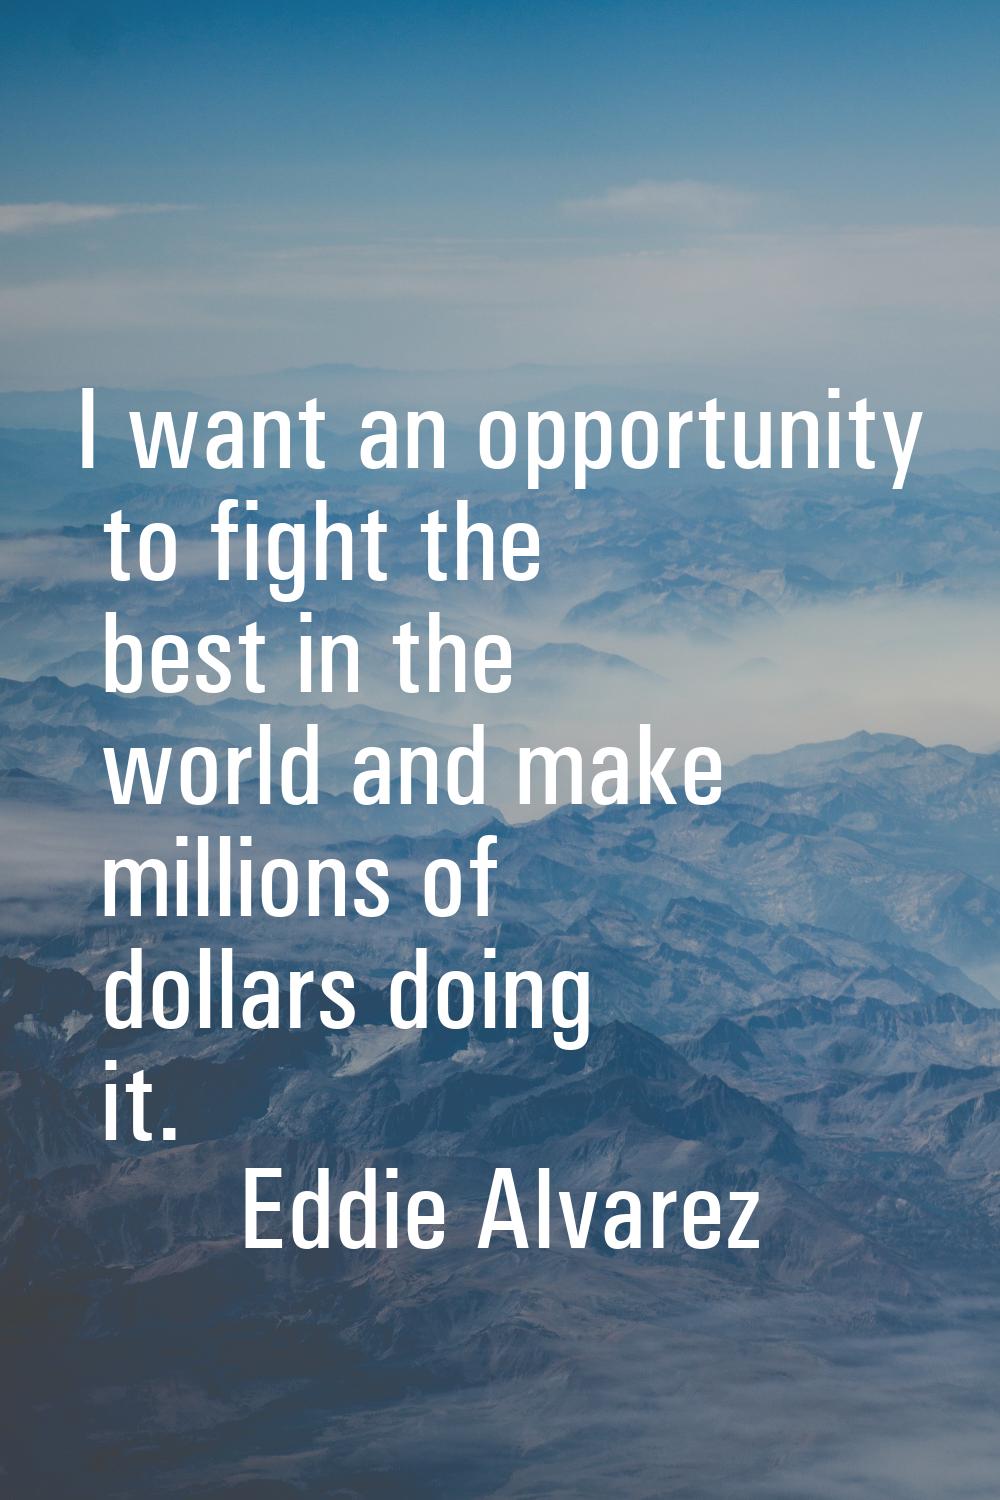 I want an opportunity to fight the best in the world and make millions of dollars doing it.